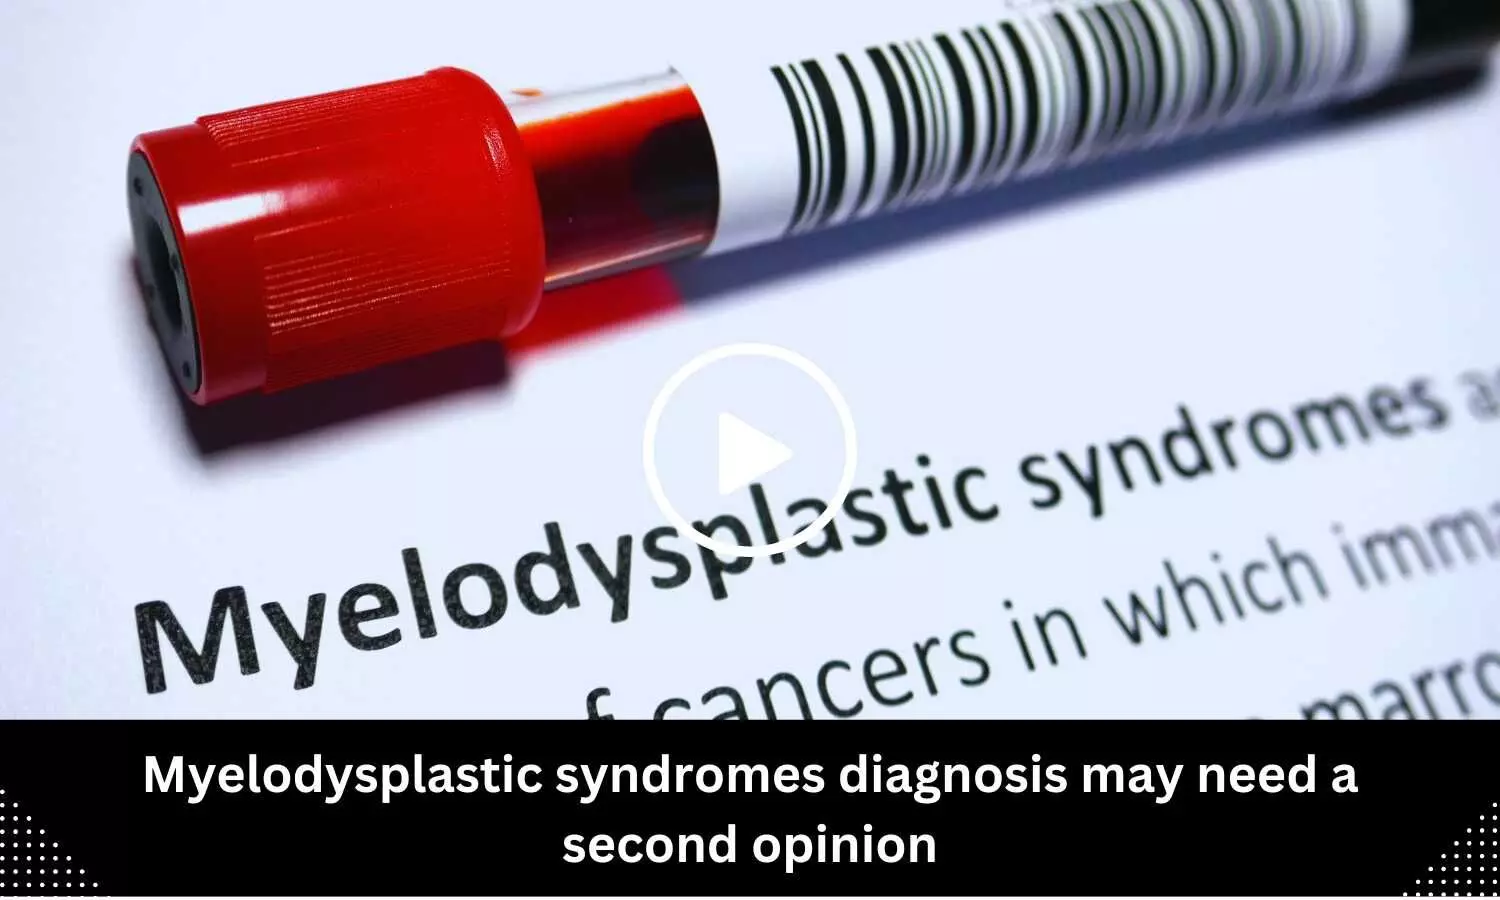 Myelodysplastic syndromes diagnosis may need a second opinion